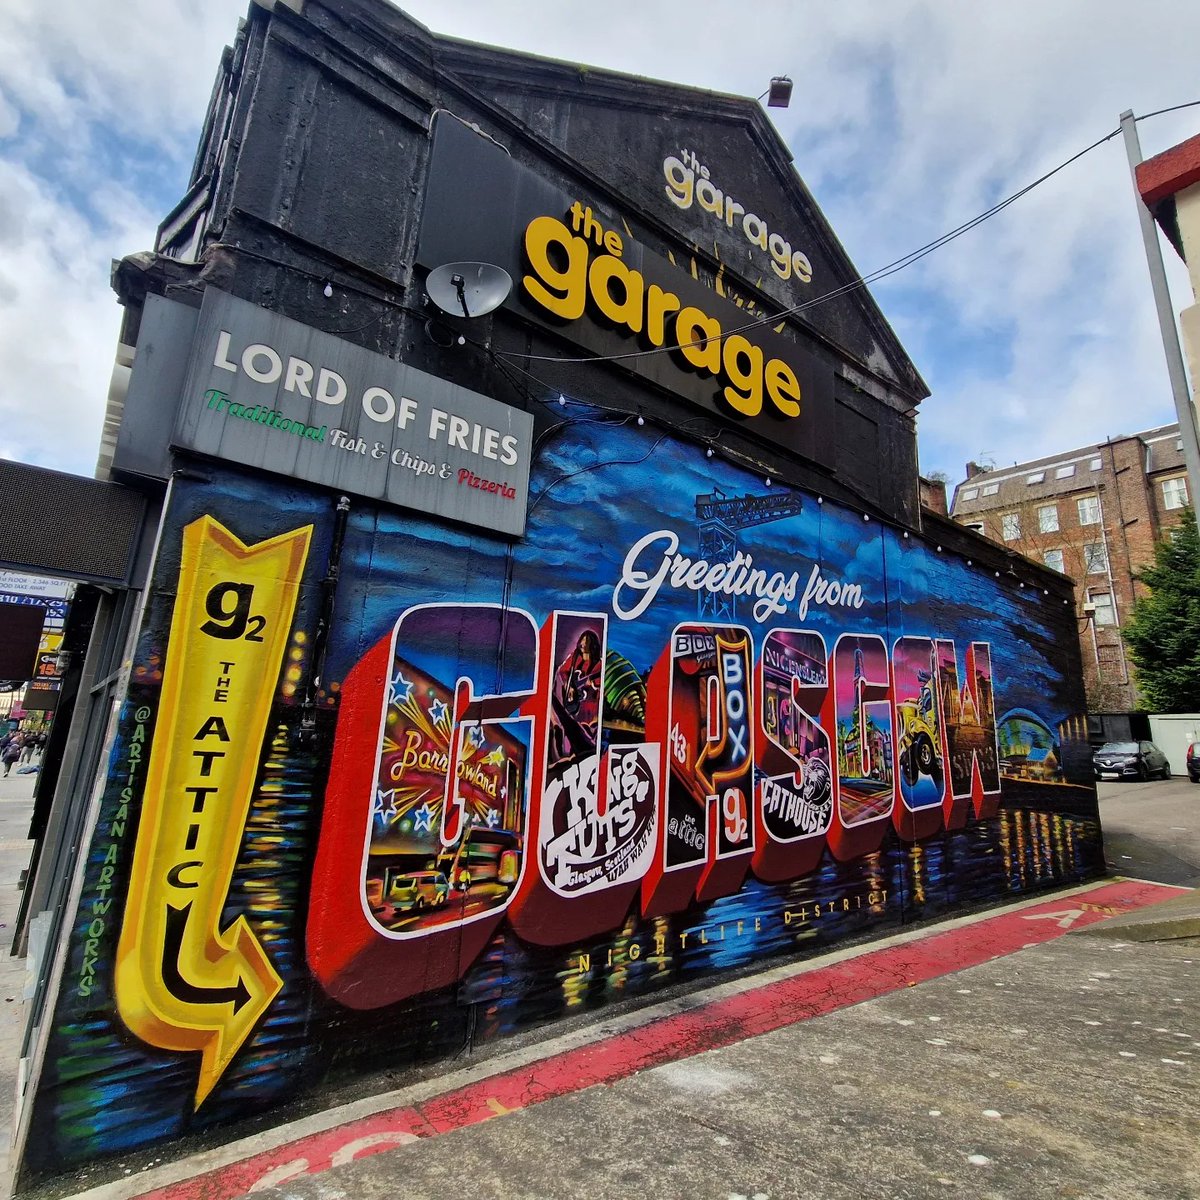 We are delighted to unveil Glasgow's newest mural adorning the side of The Garage! This vibrant artwork by @artisanartworks celebrates the cities live music scene, as you look closer you'll notice some of the most iconic venues in Glasgow's nightlife district,